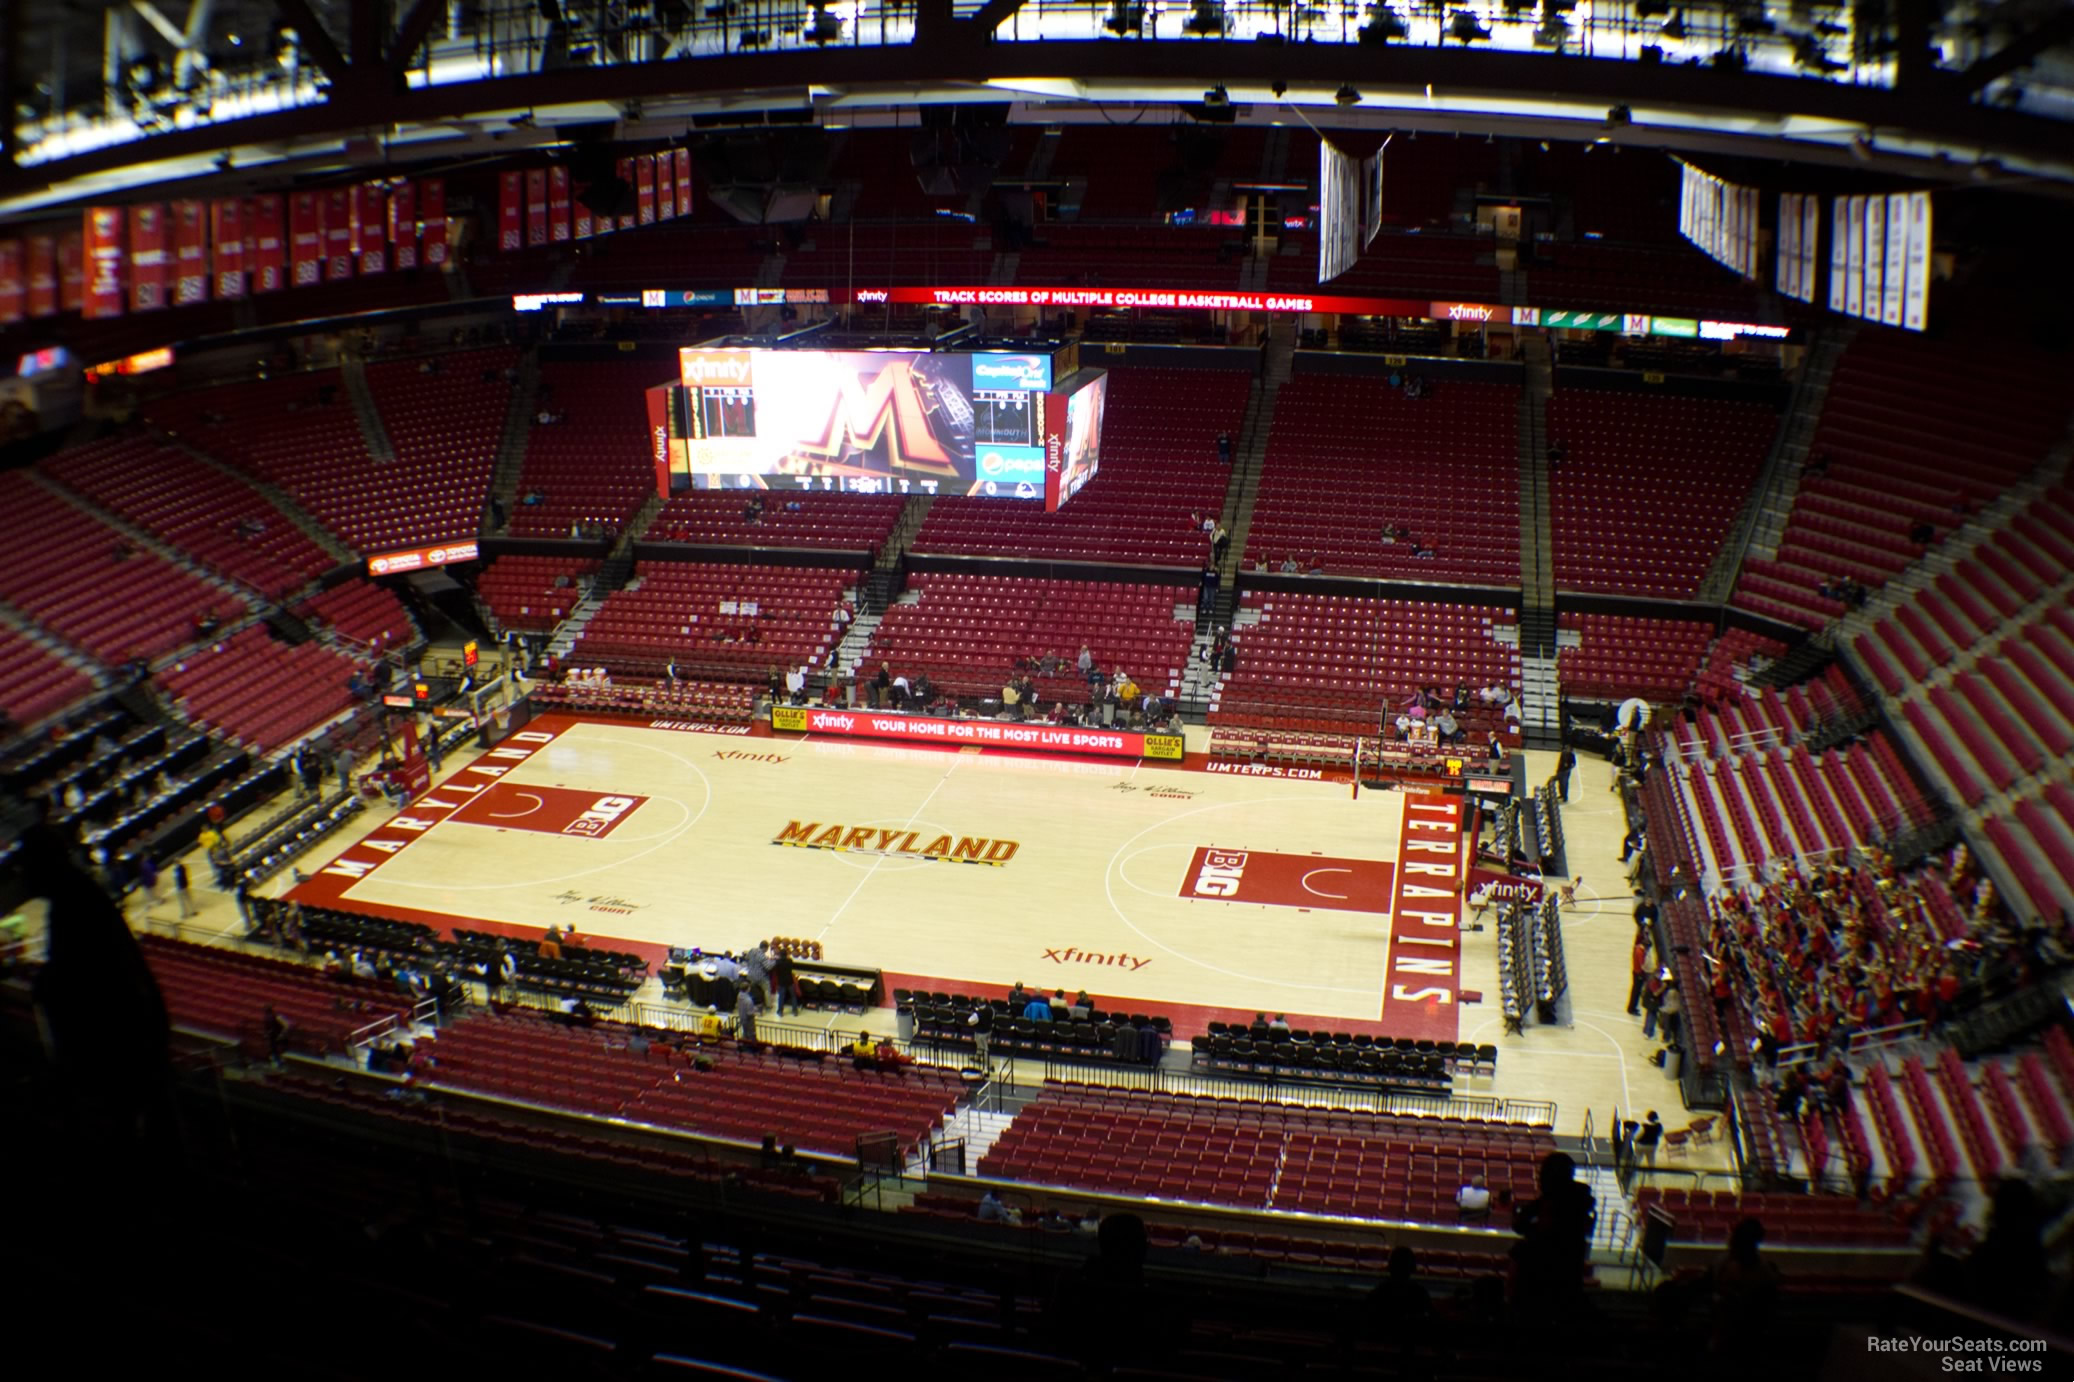 section 215, row 11 seat view  - xfinity center (maryland)